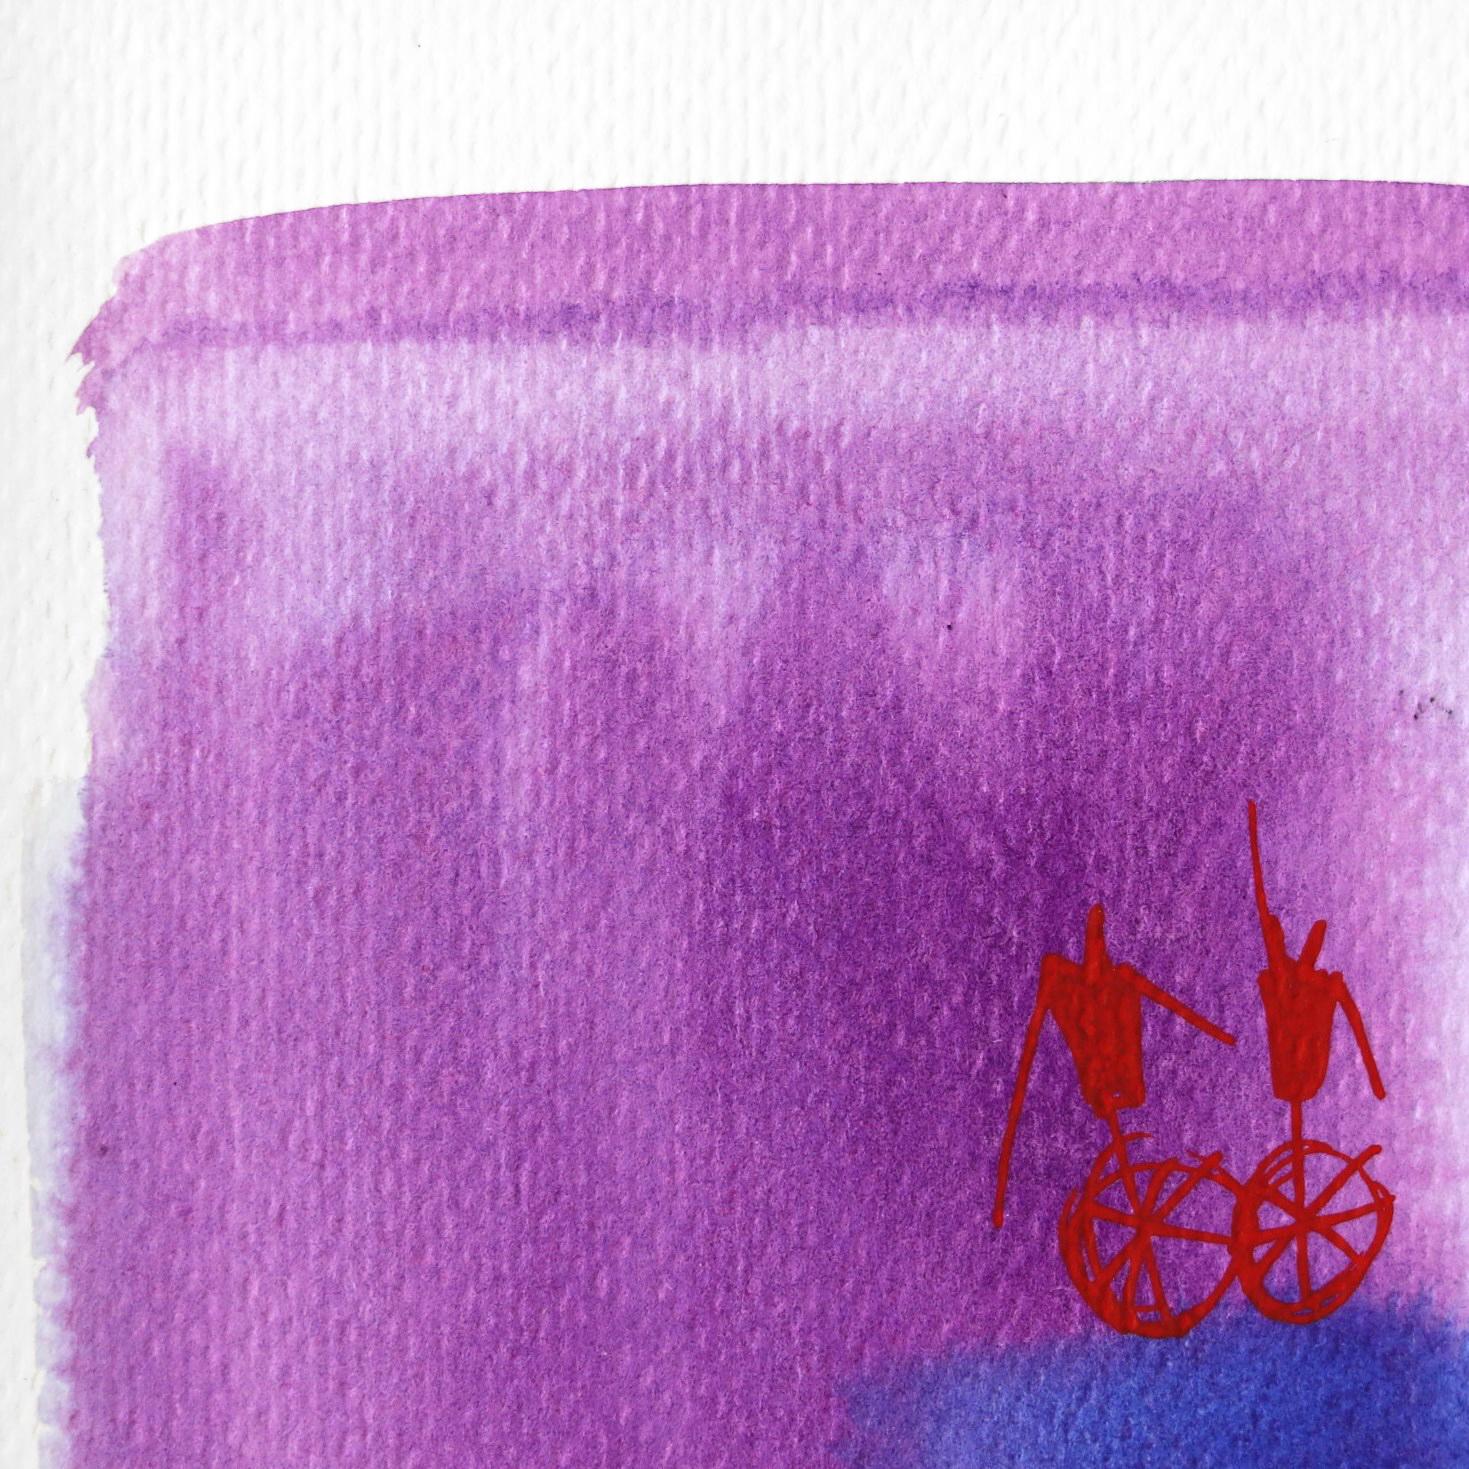 Serie Dibujos Felices 3 - Original Purple Watercolor and Ink Artwork on Paper - Painting by Sergio Valenzuela